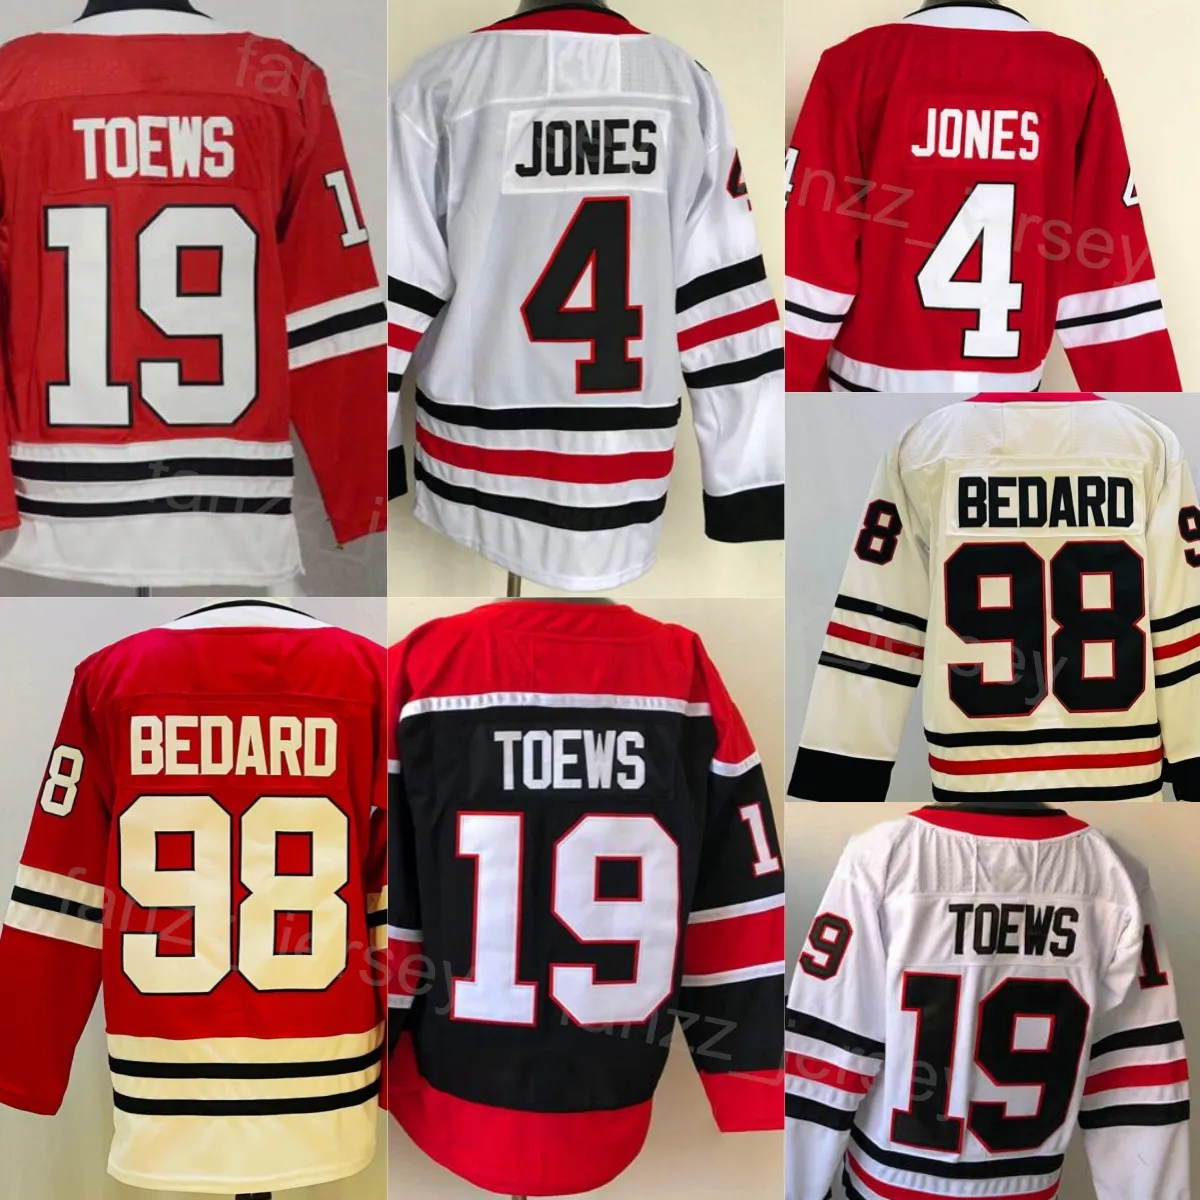 Reverse Retro Hockey 98 Connor Bedard Jersey 4 Seth Jones 19 Jonathan Toews Team Color Black White Red For Sport Fans Breathable Embroidery And Stitched Good